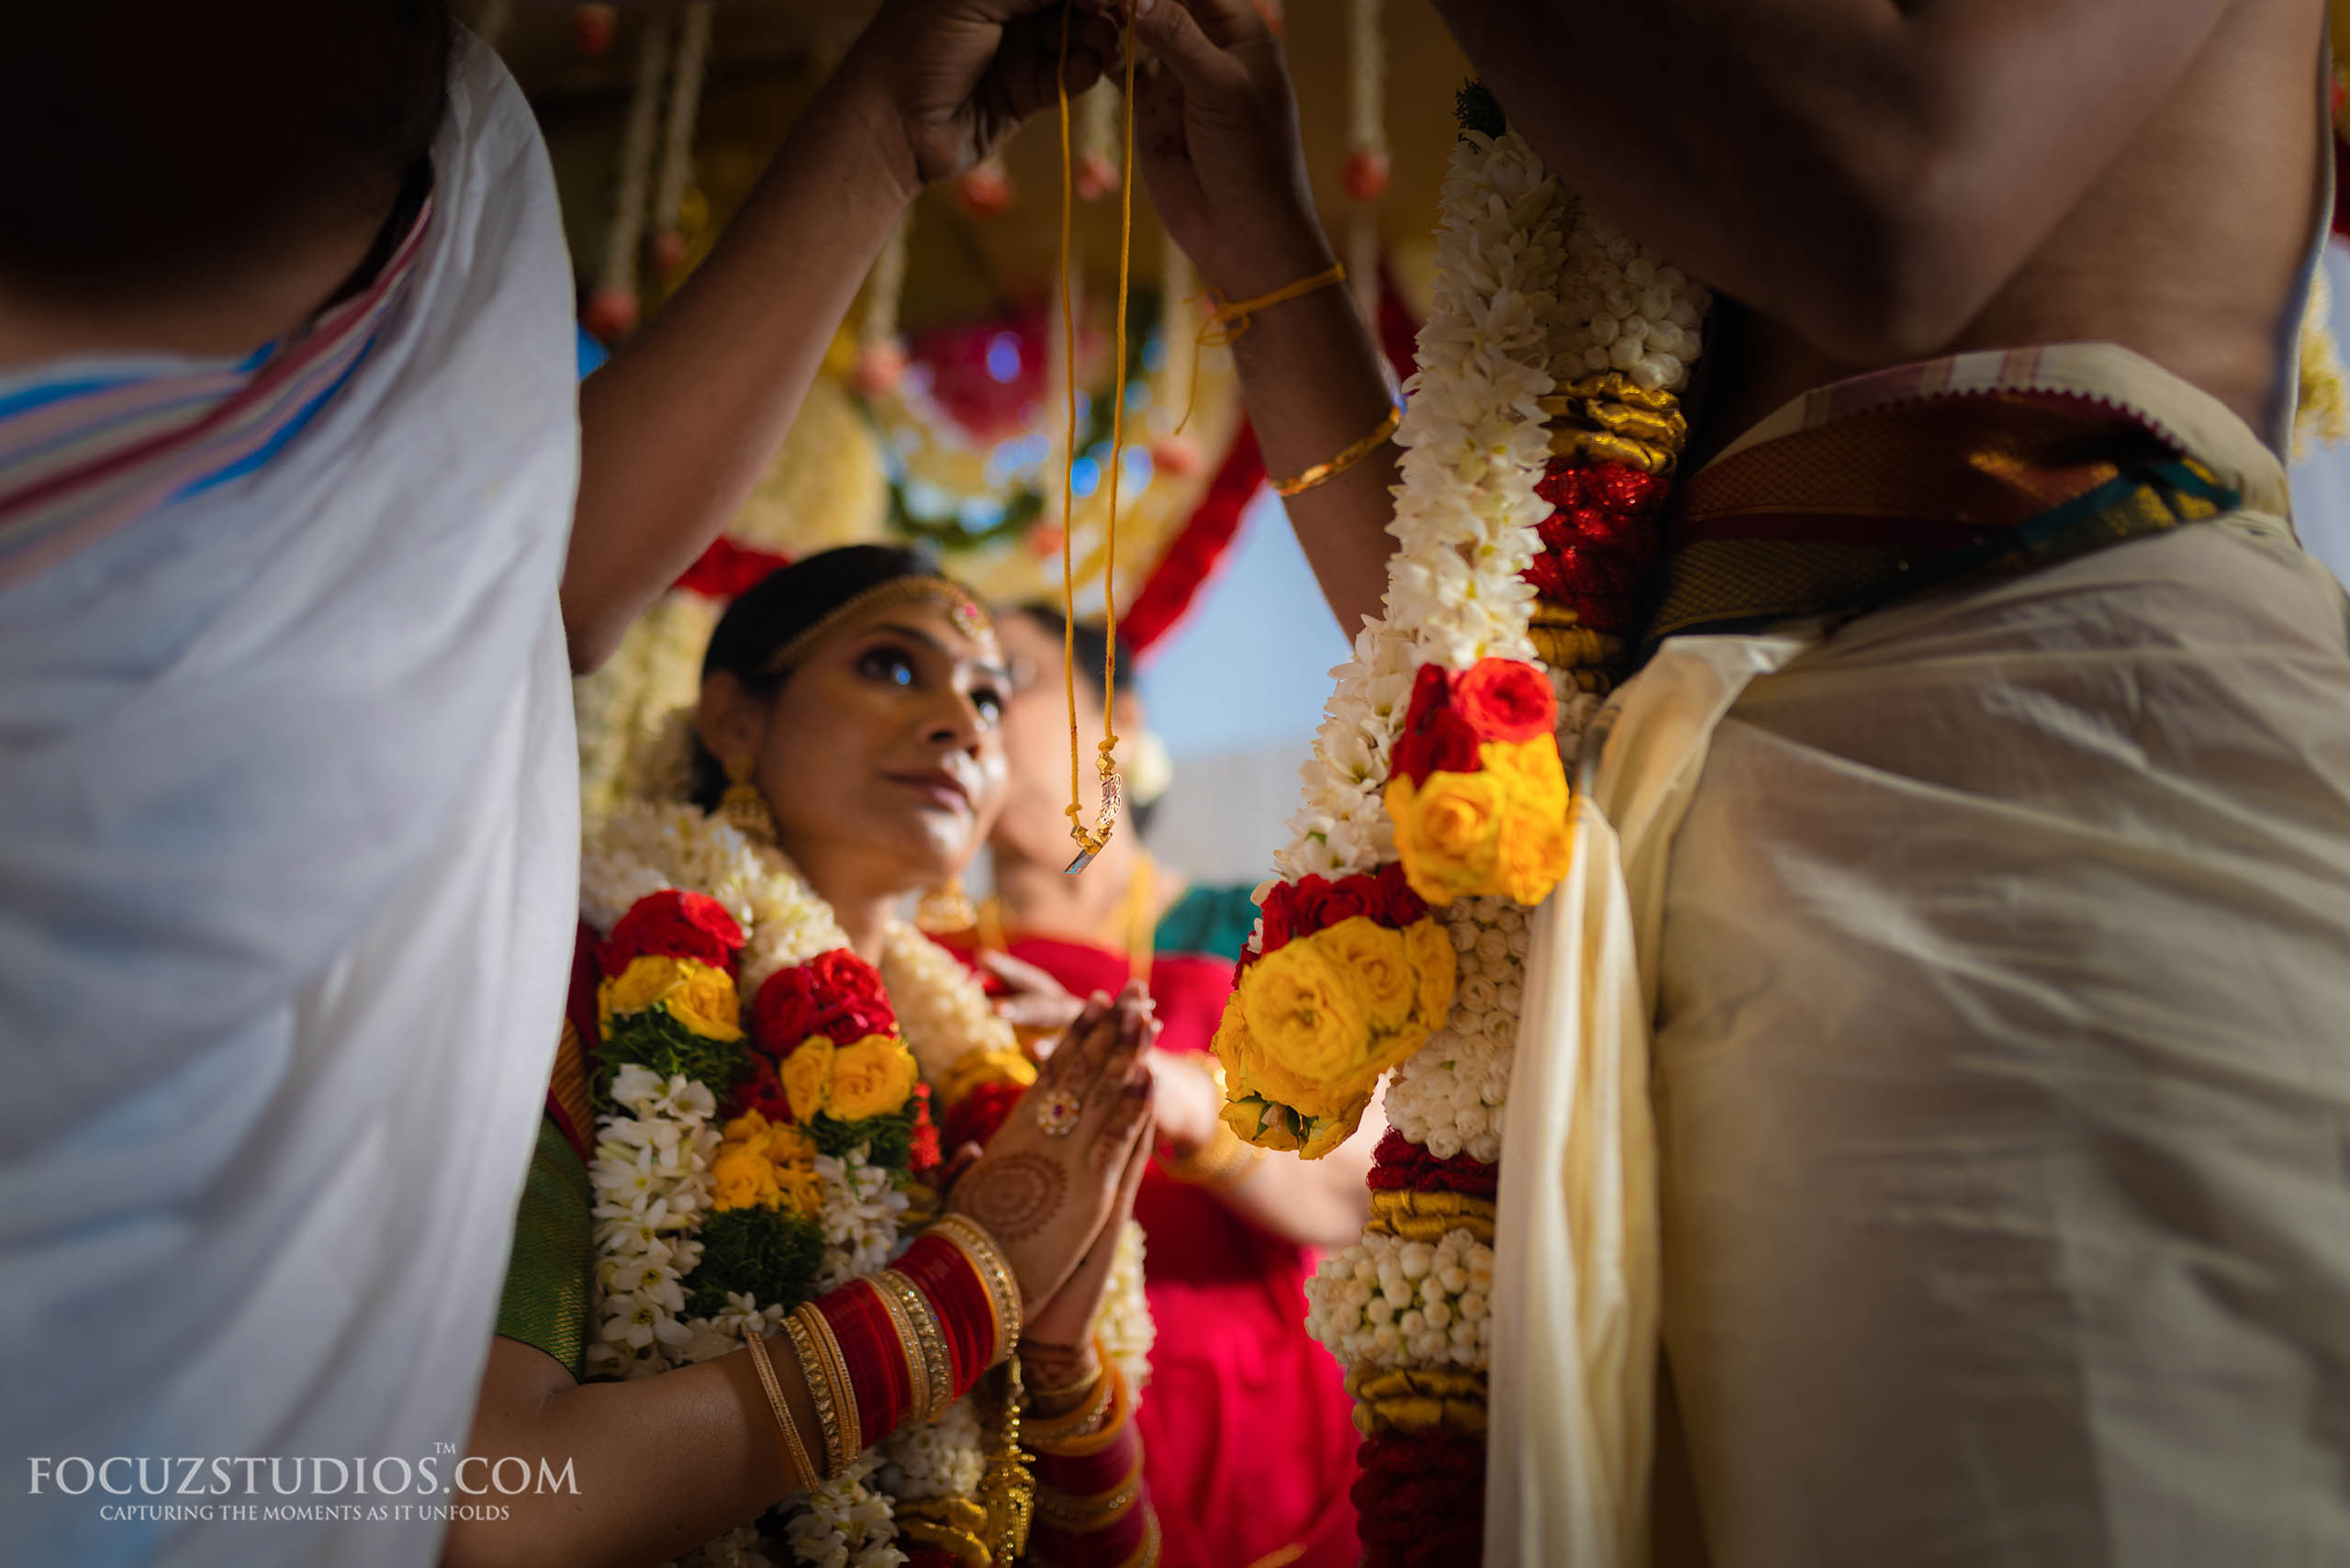 Chennai Tamil Brahmin Wedding: A Timeless Celebration of Love, Rituals, and Traditions Captured Through the Lens